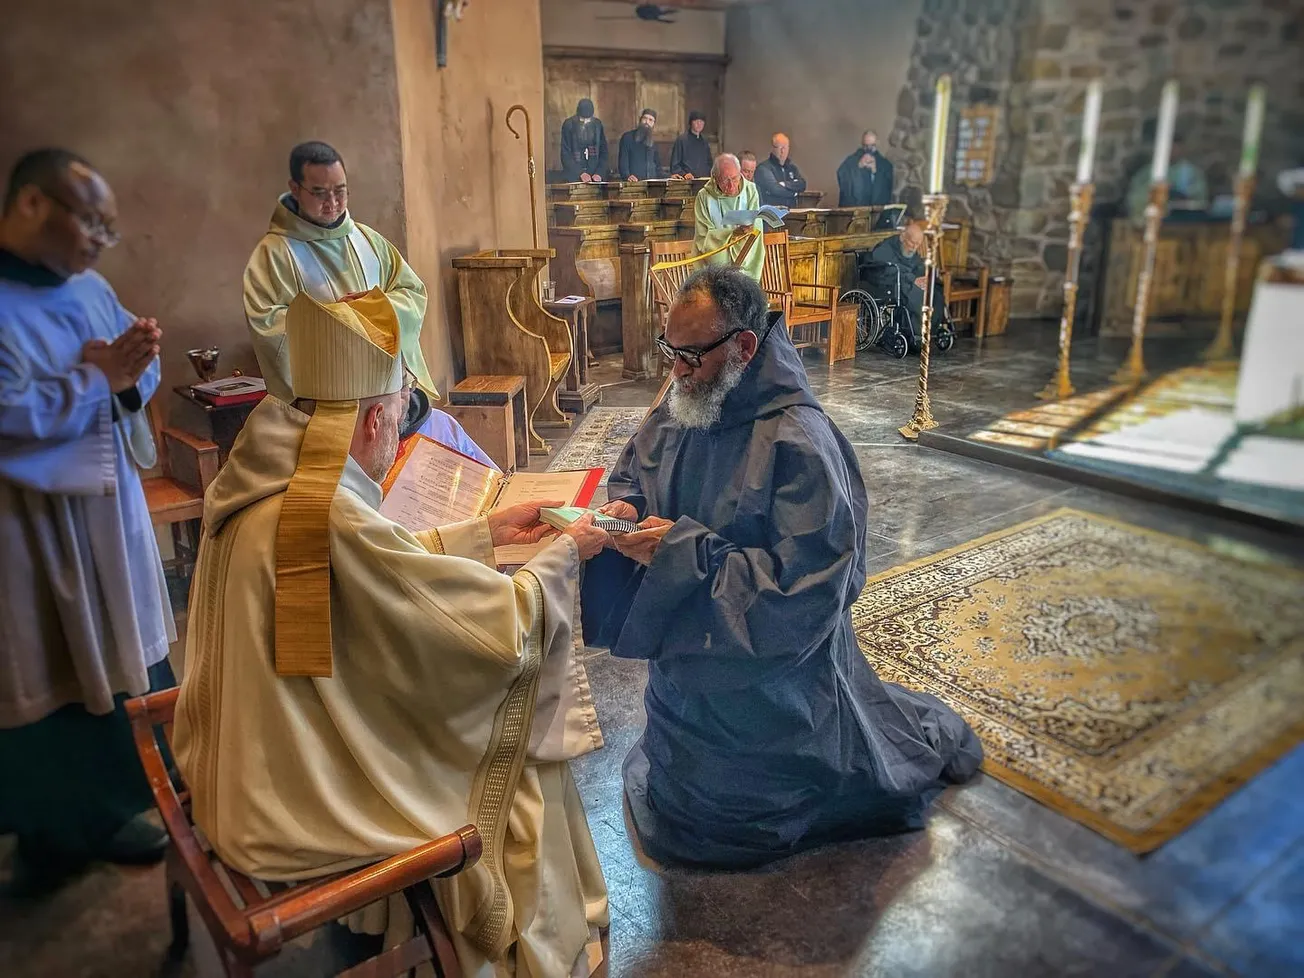 Black Catholic monk makes final vows in New Mexico